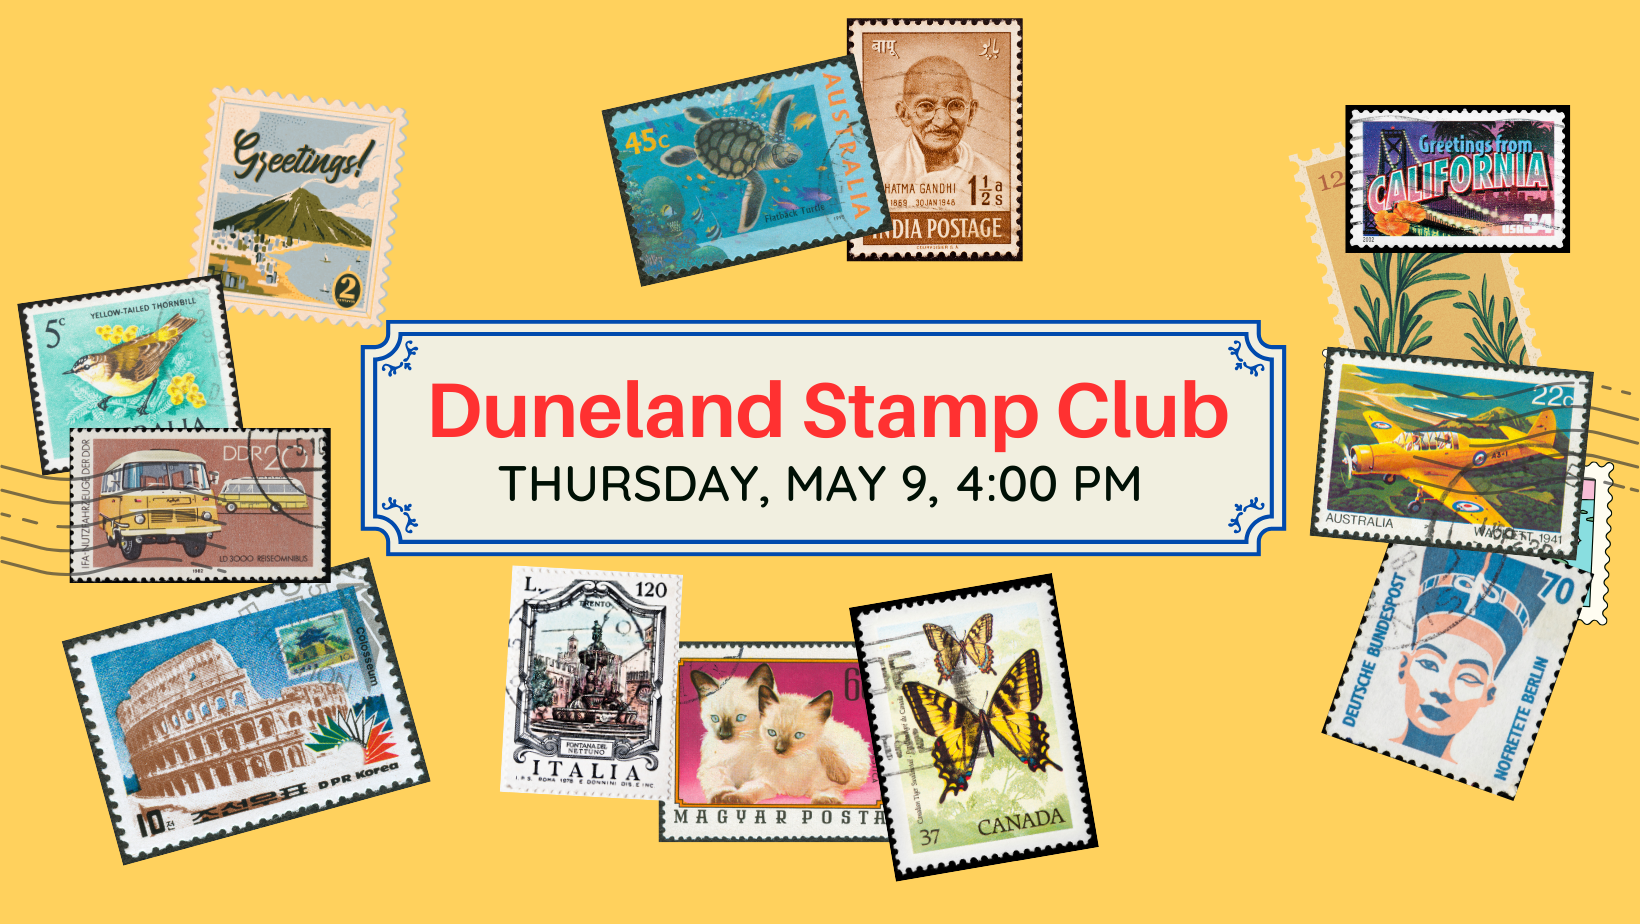 Duneland Stamp Club, Thursday, May 9 at 4:00 pm